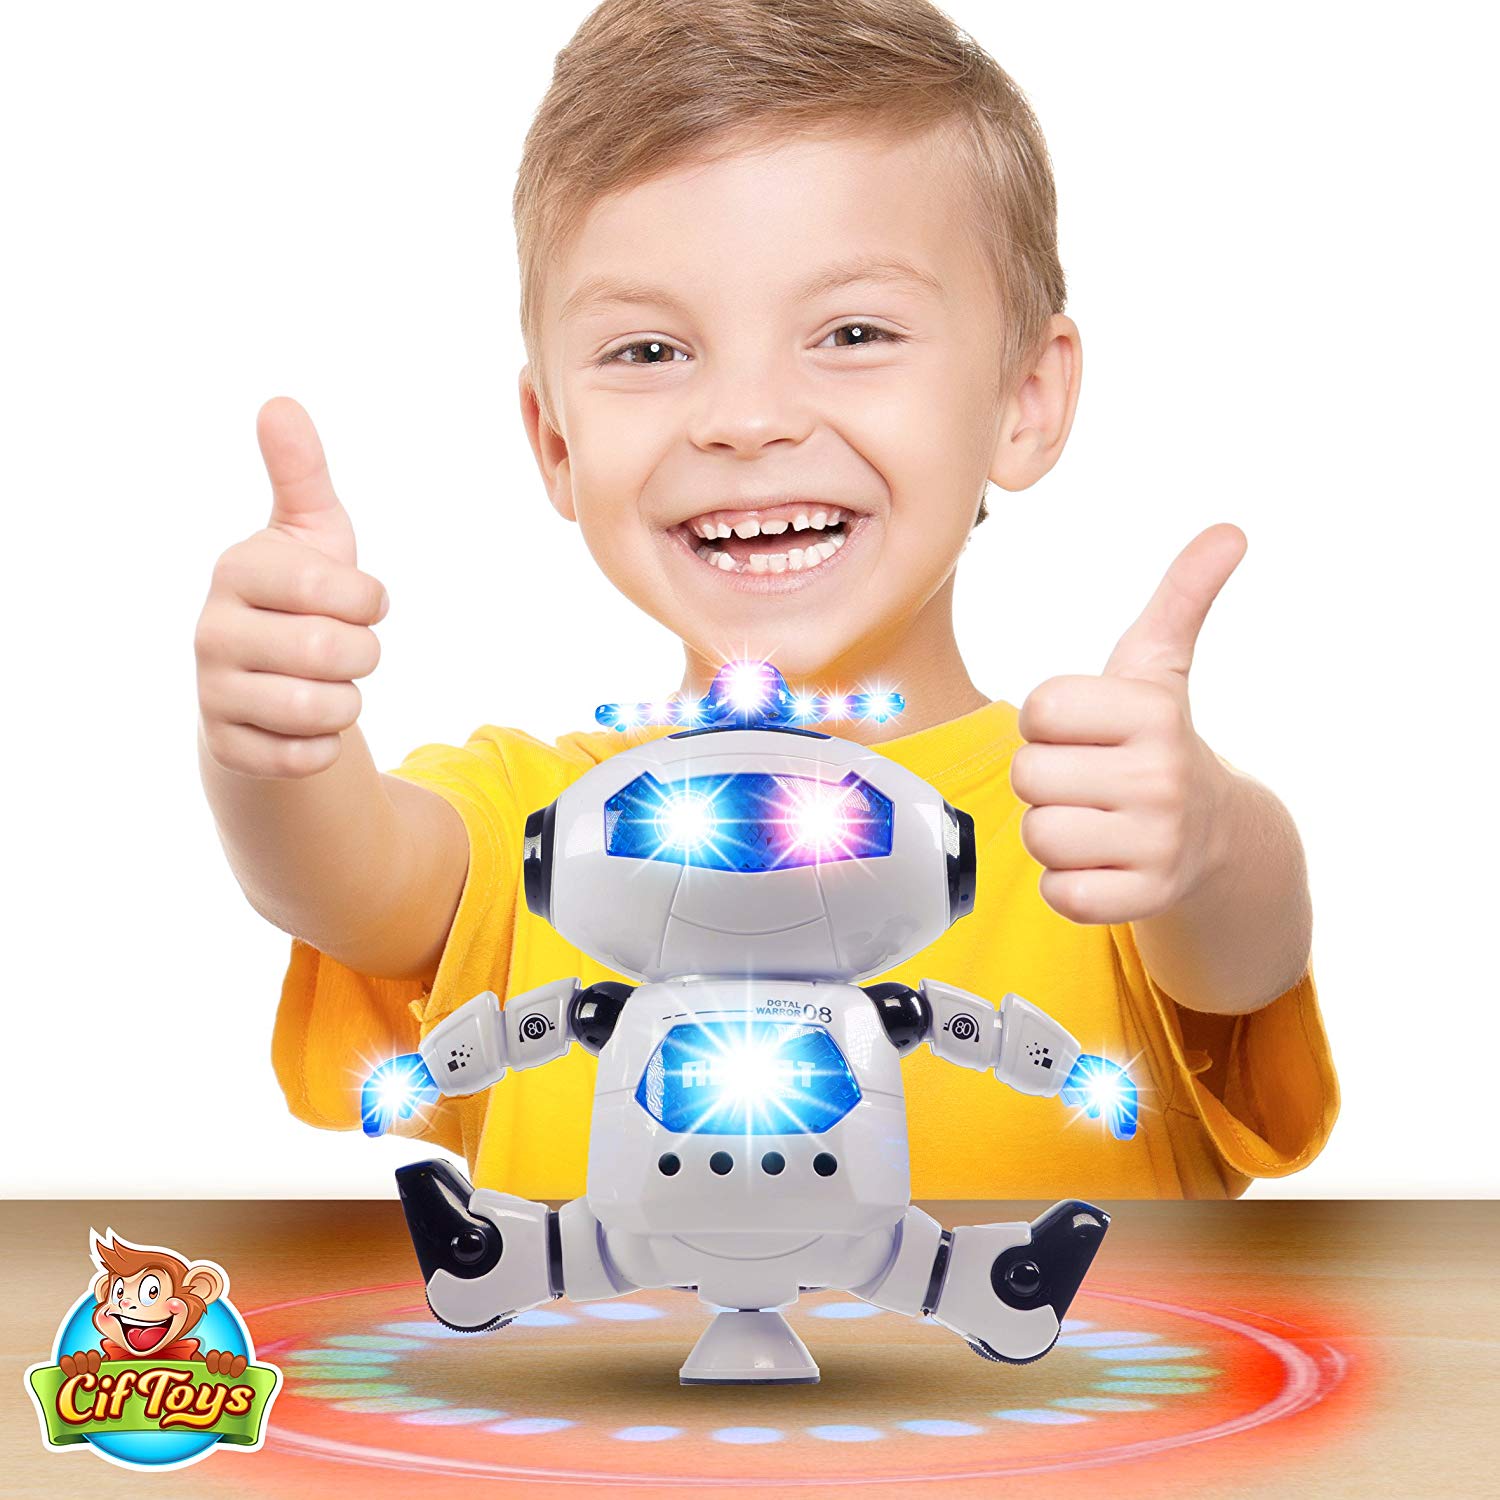 CifToys Electronic Walking Dancing Robot Toy, Toddler Toys for 1 2 3 Year Old Boy Toys Gifts - image 1 of 4